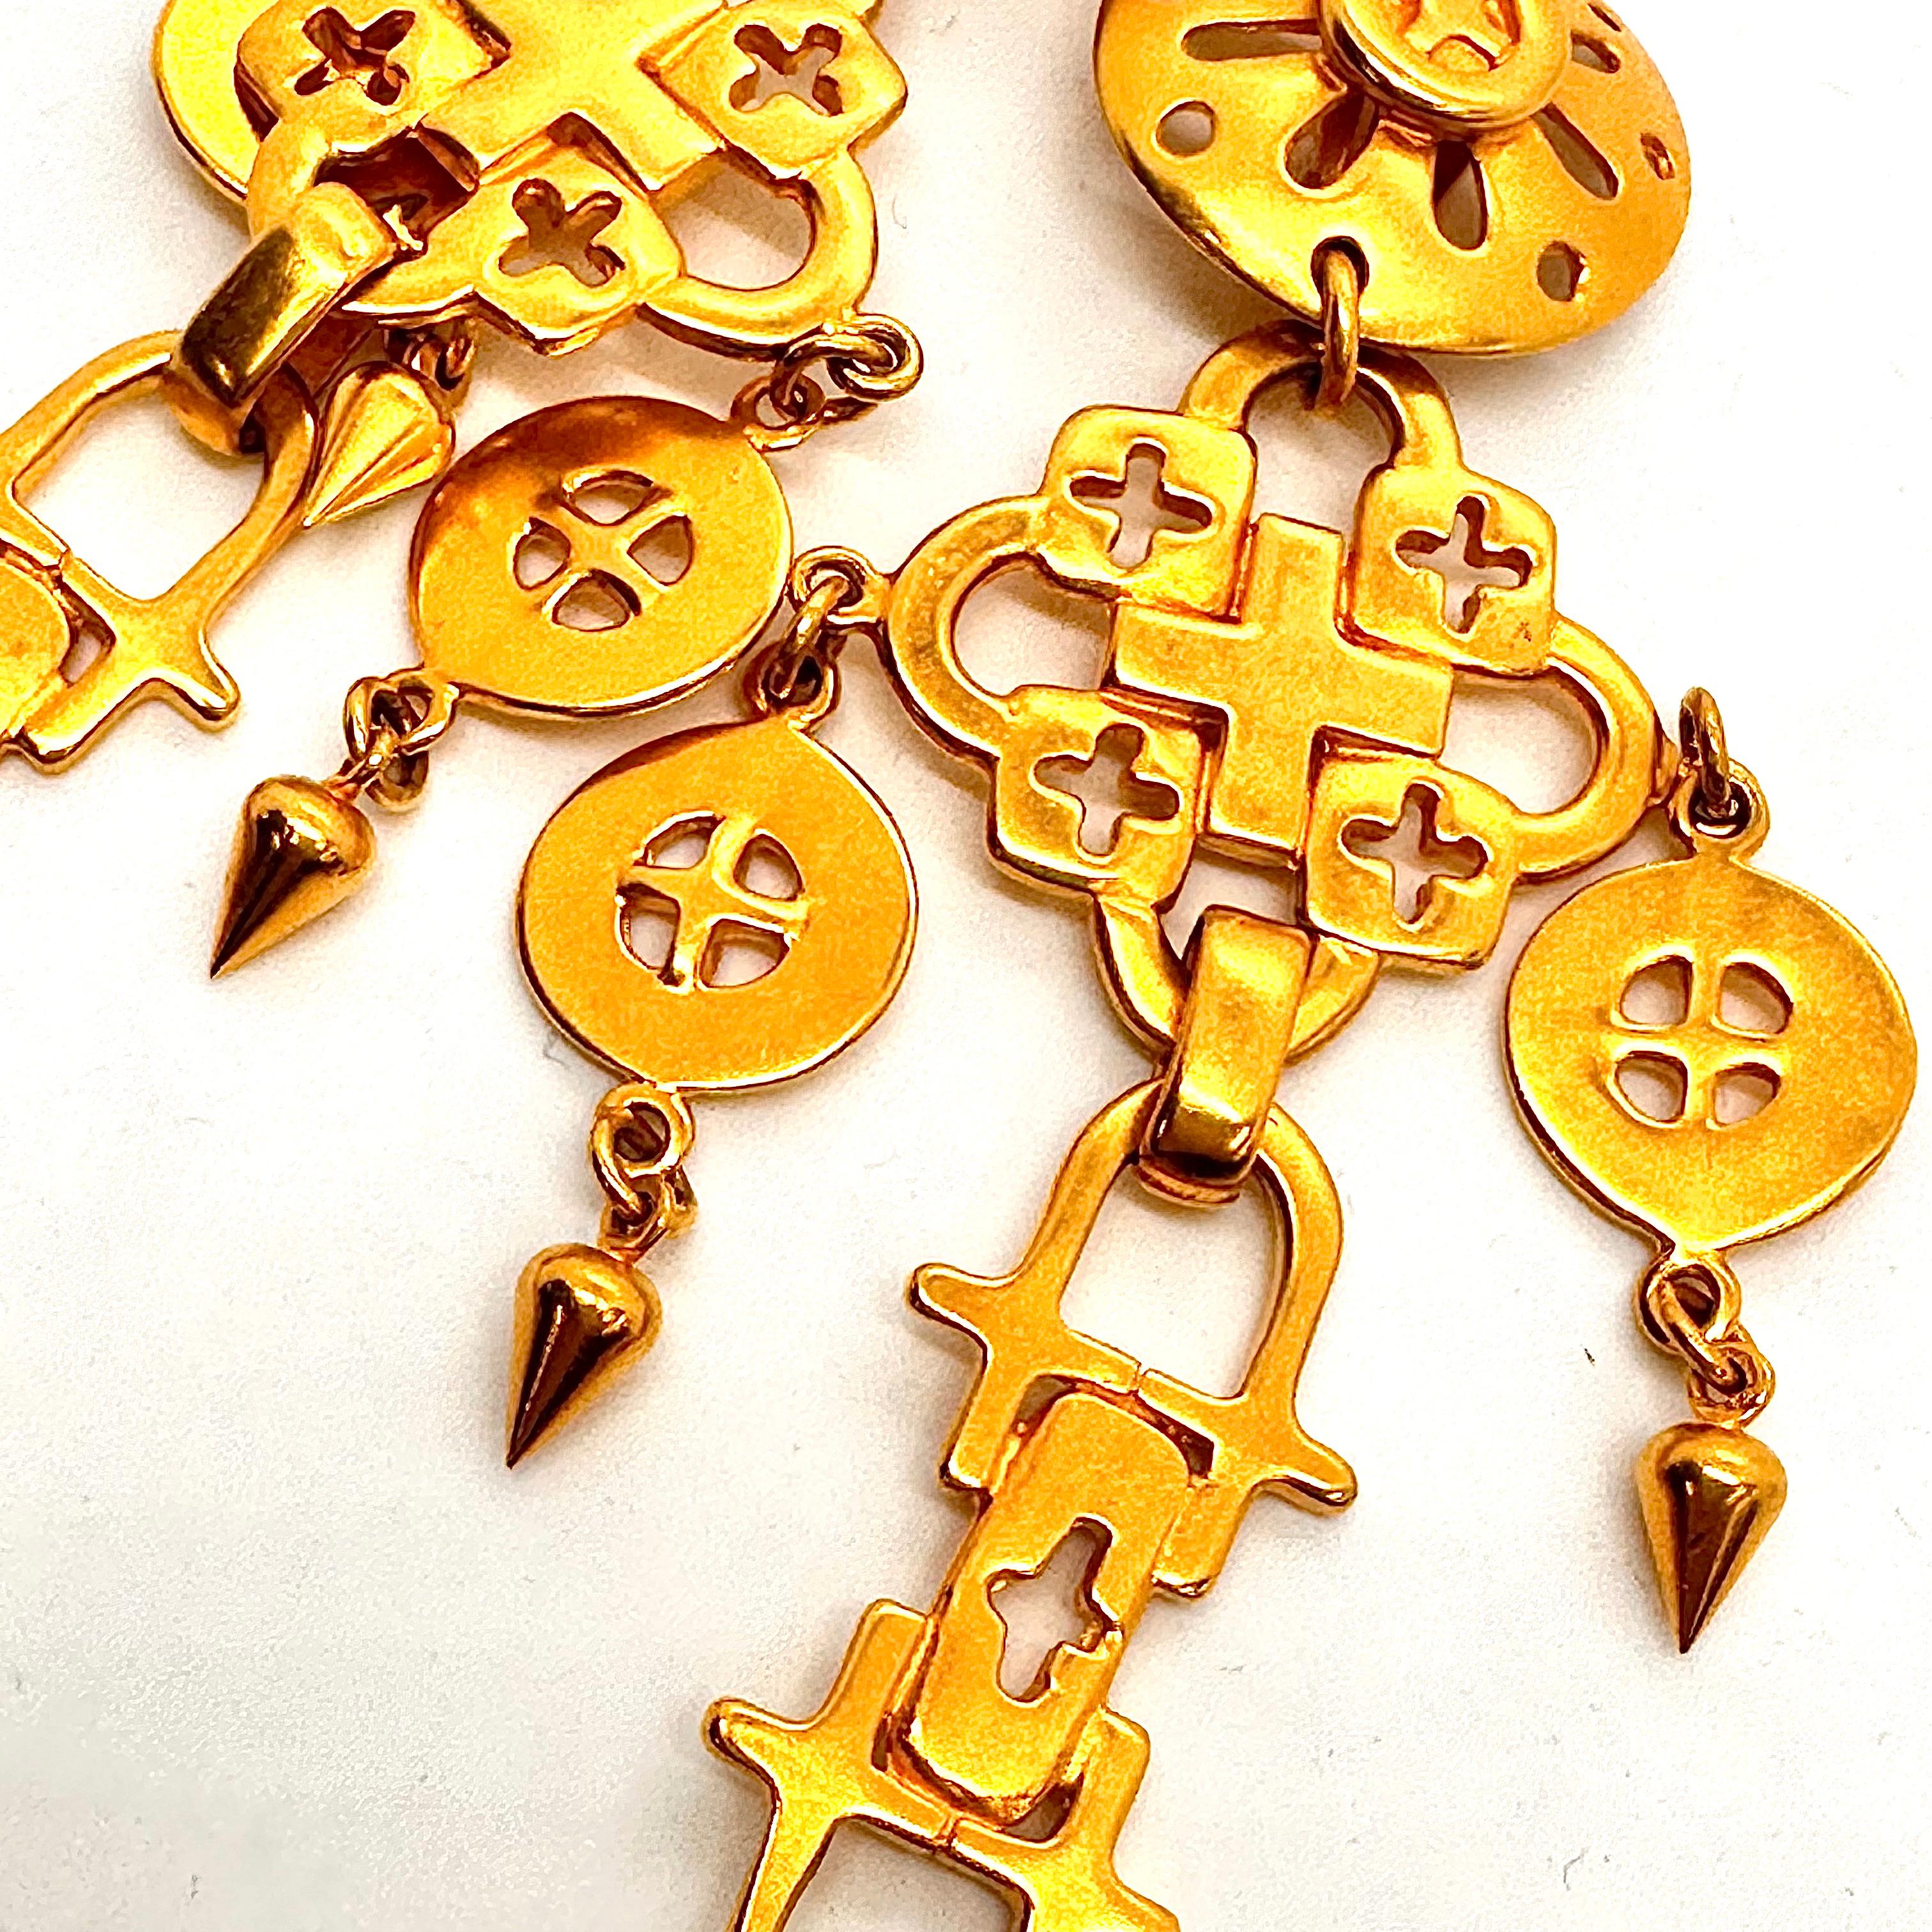 Exotic Bold Gold drop dead chandelier earrings by Robert Lee Morris are lightweight and dramatic fun. Easy to wear clips, the design is composed of many cast element using the cross theme. Created in 1992 as part of the huge trend in fashion and